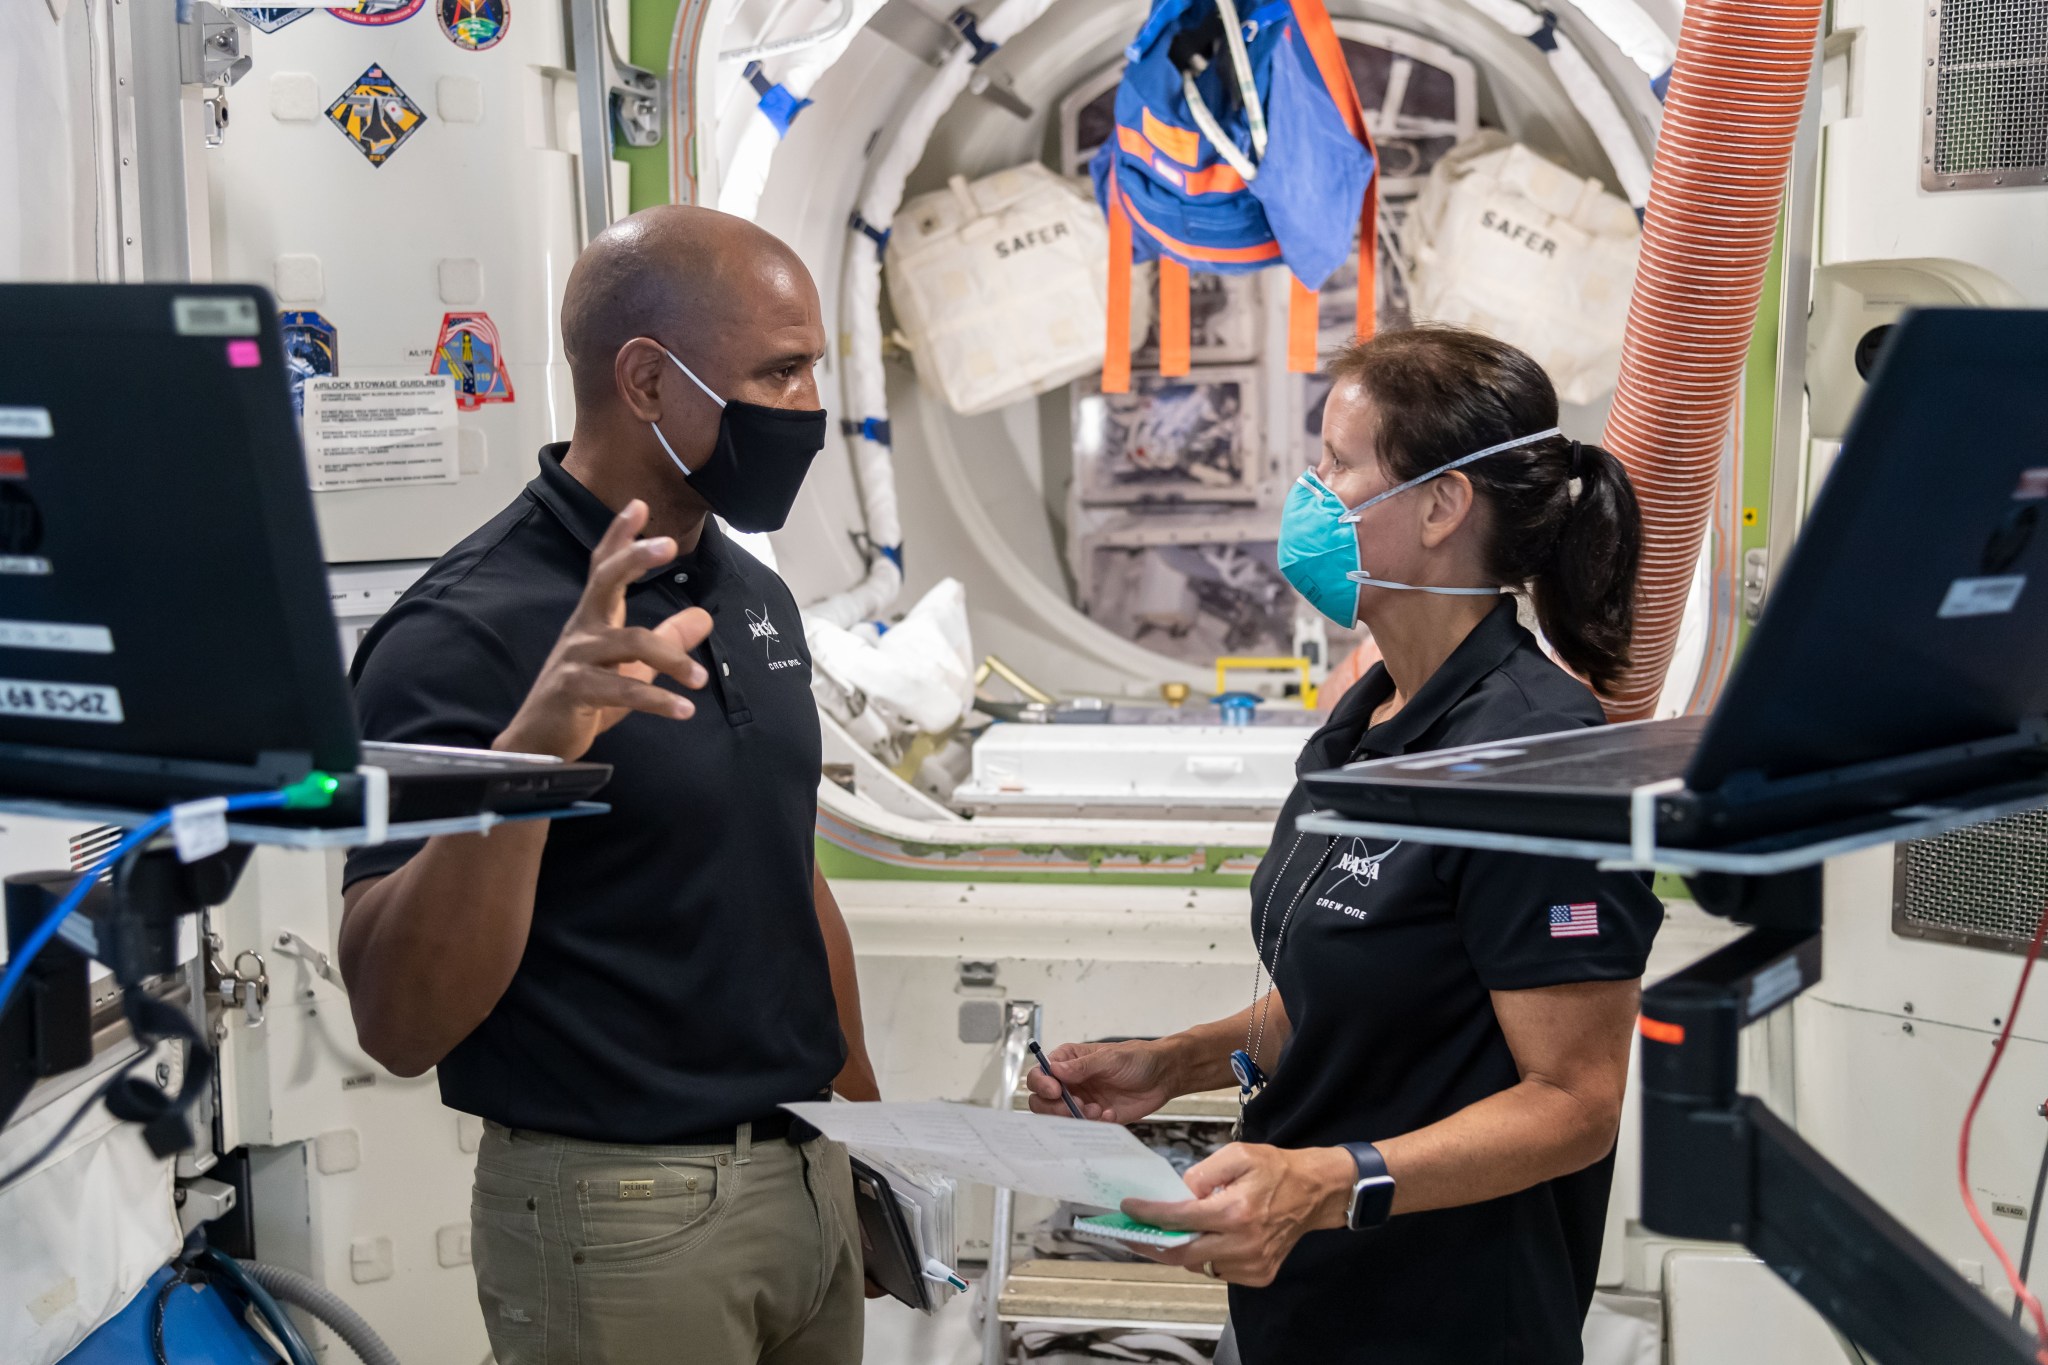 SpaceX Crew-1 crew members Victor Glover and Shannon Walker participate in pre-flight Emergency Scenarios training.